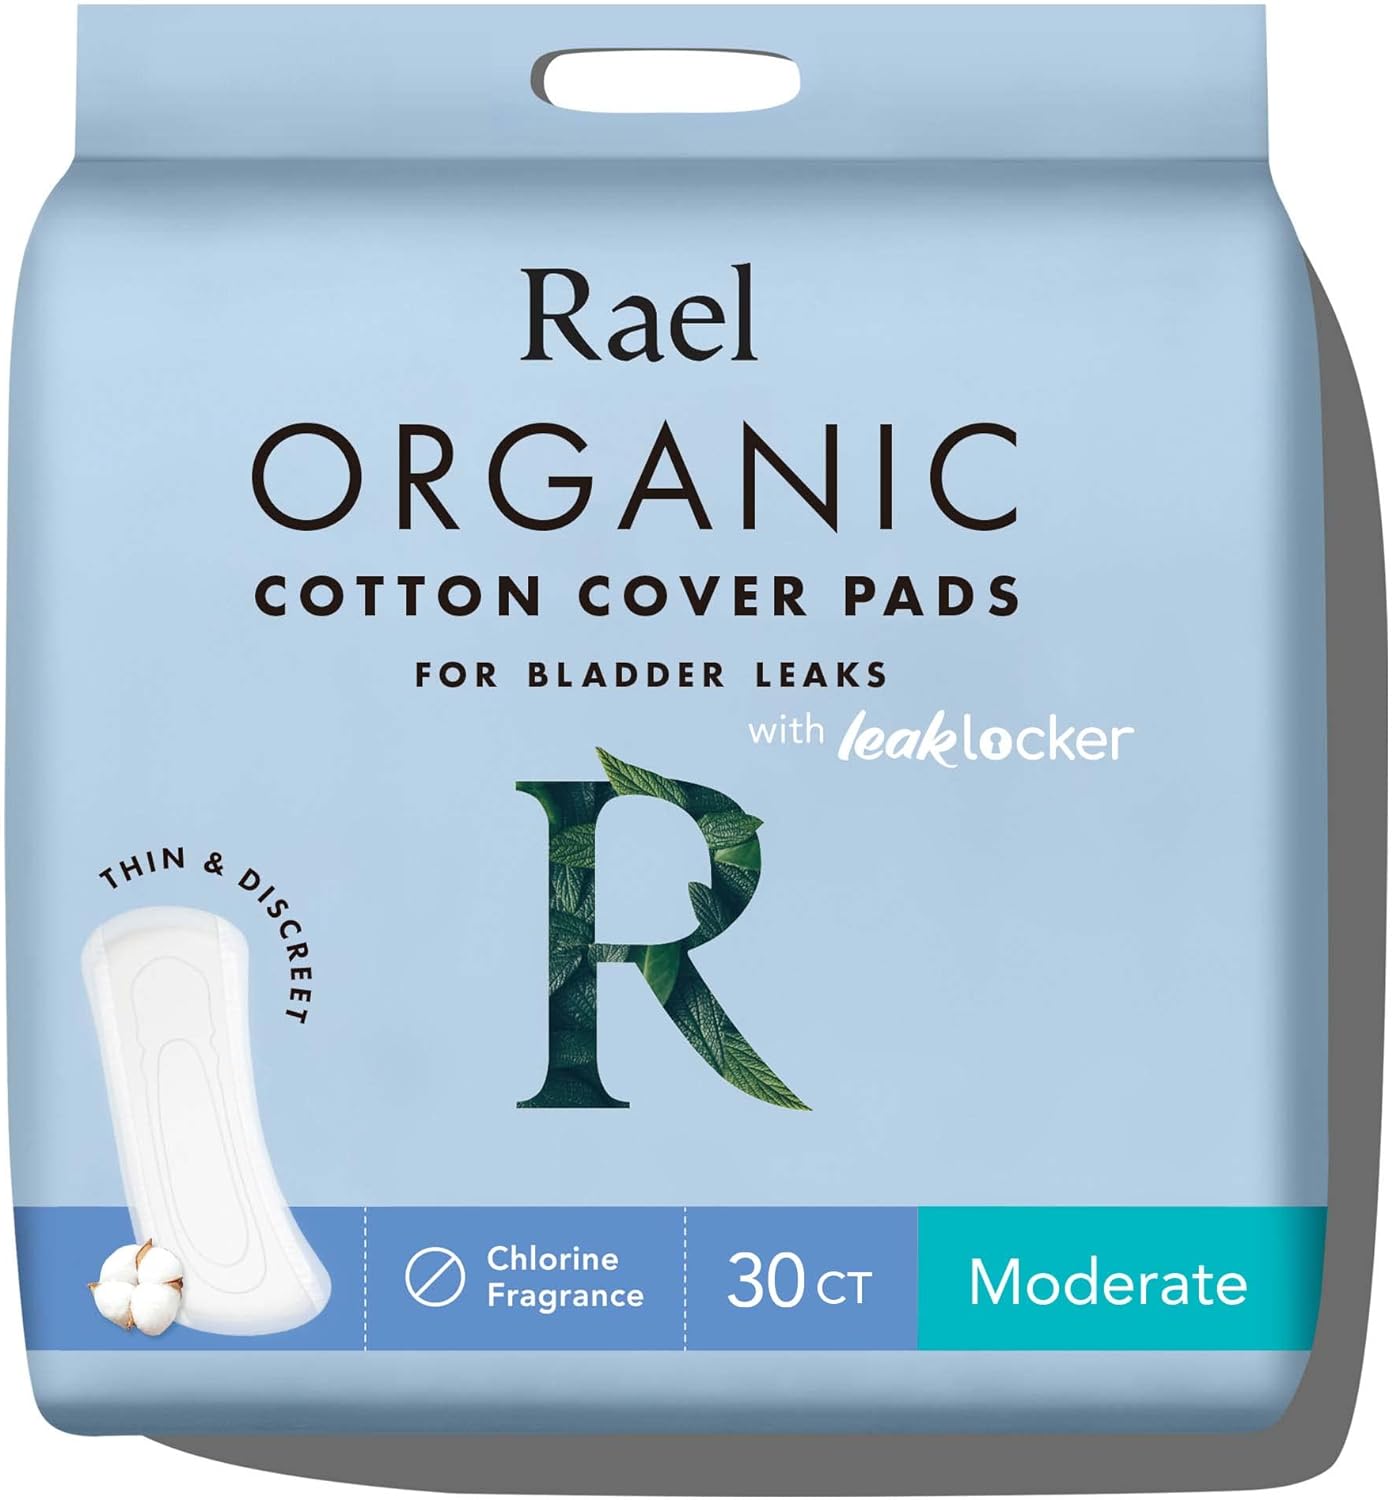 Rael Incontinence Pads for Women, Organic Cotton Cover - Postpartum Essential, Heavy Absorbency, Bladder Leak Control, 4 Layer Core with Leak Guard Technology, Long Length (Moderate, 30 Count)